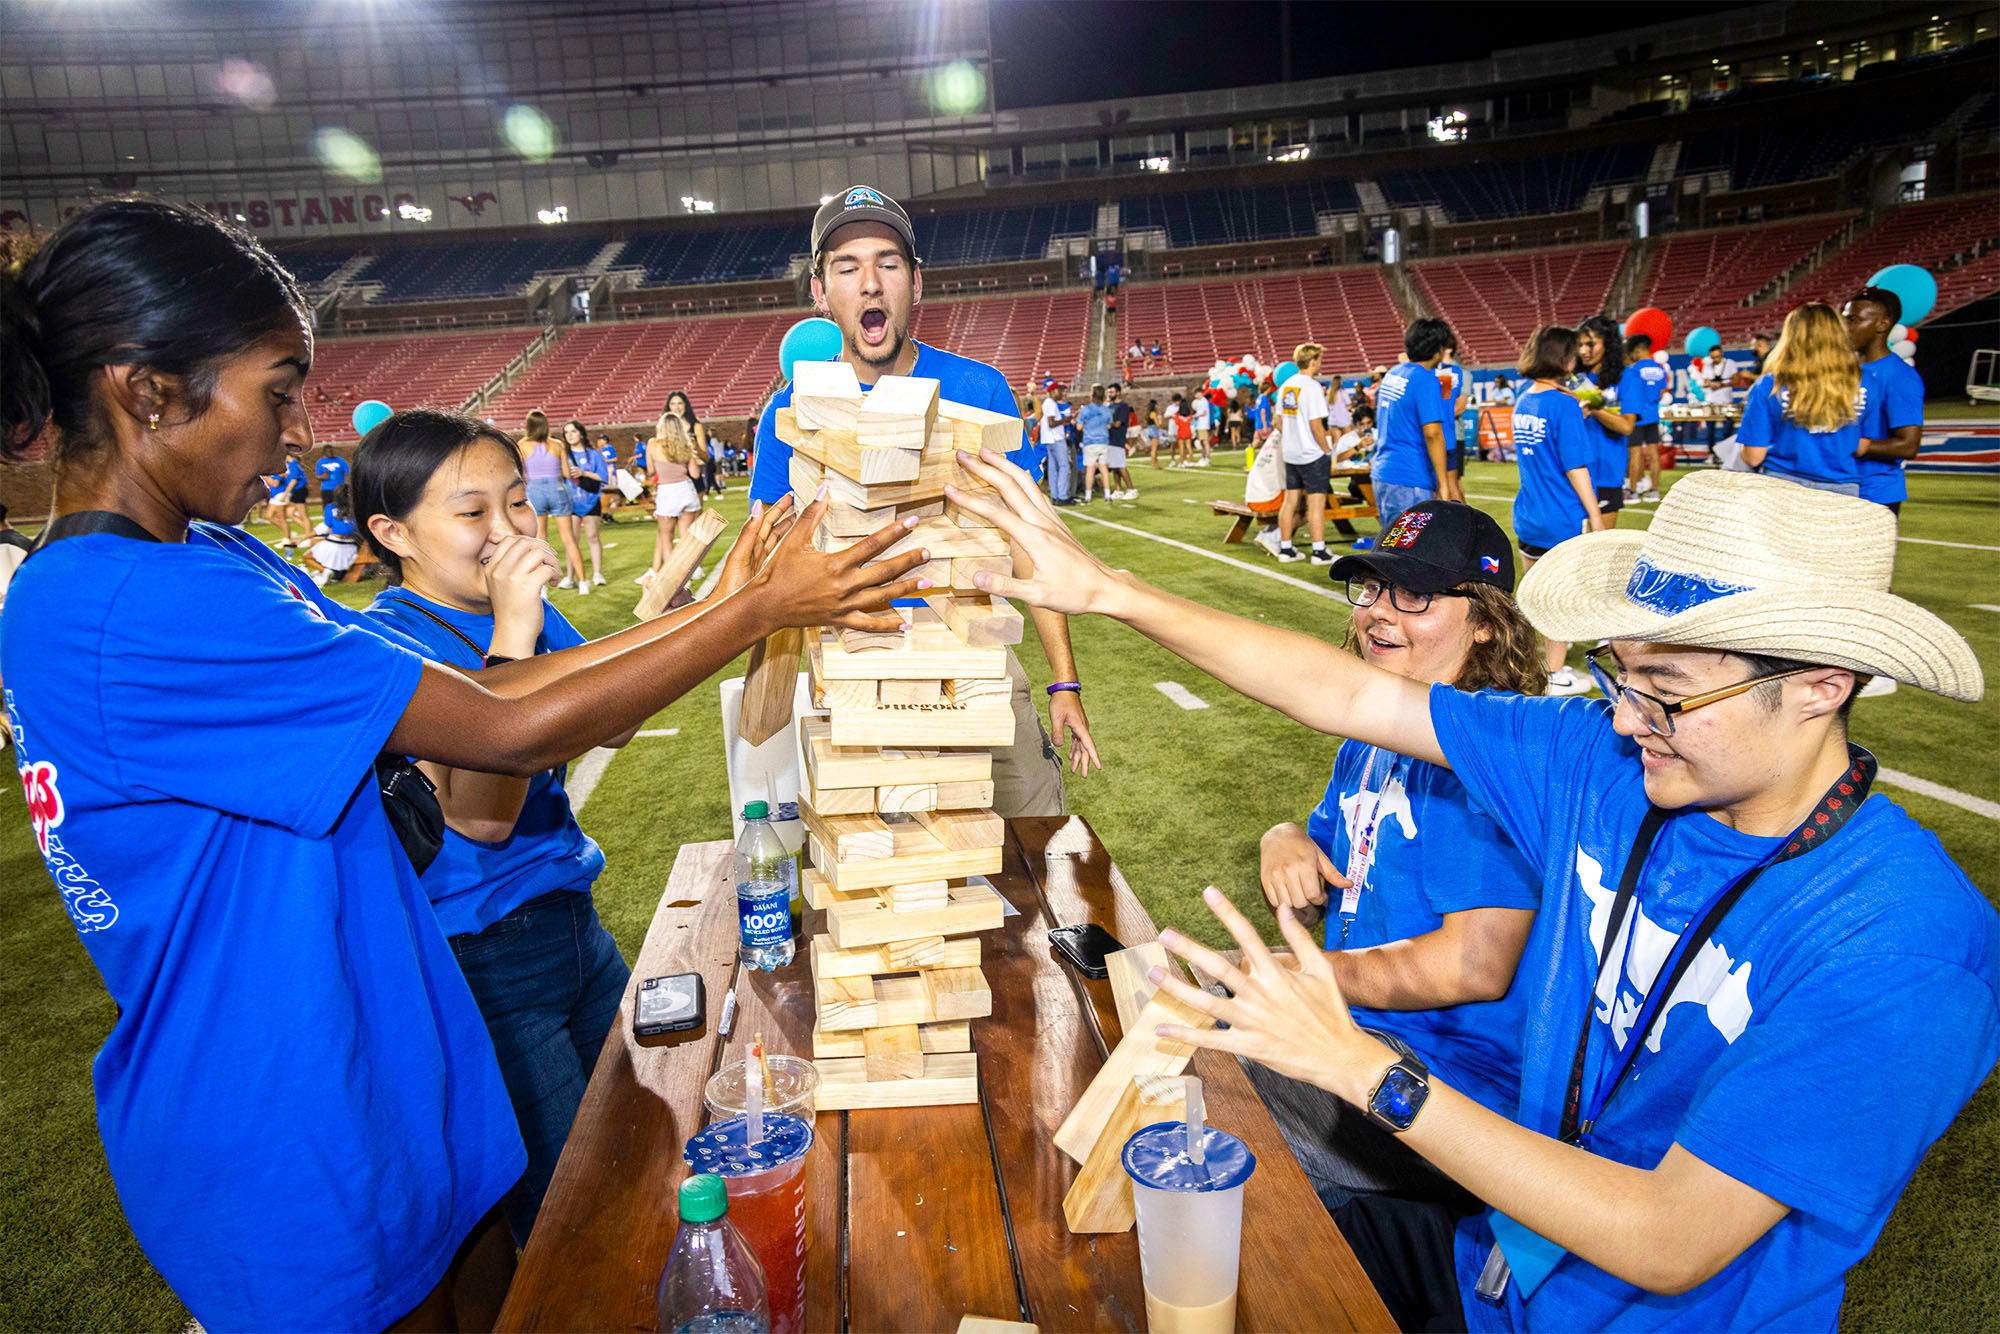 five students in blue shirts playing jenga on picnic table in football stadium at night